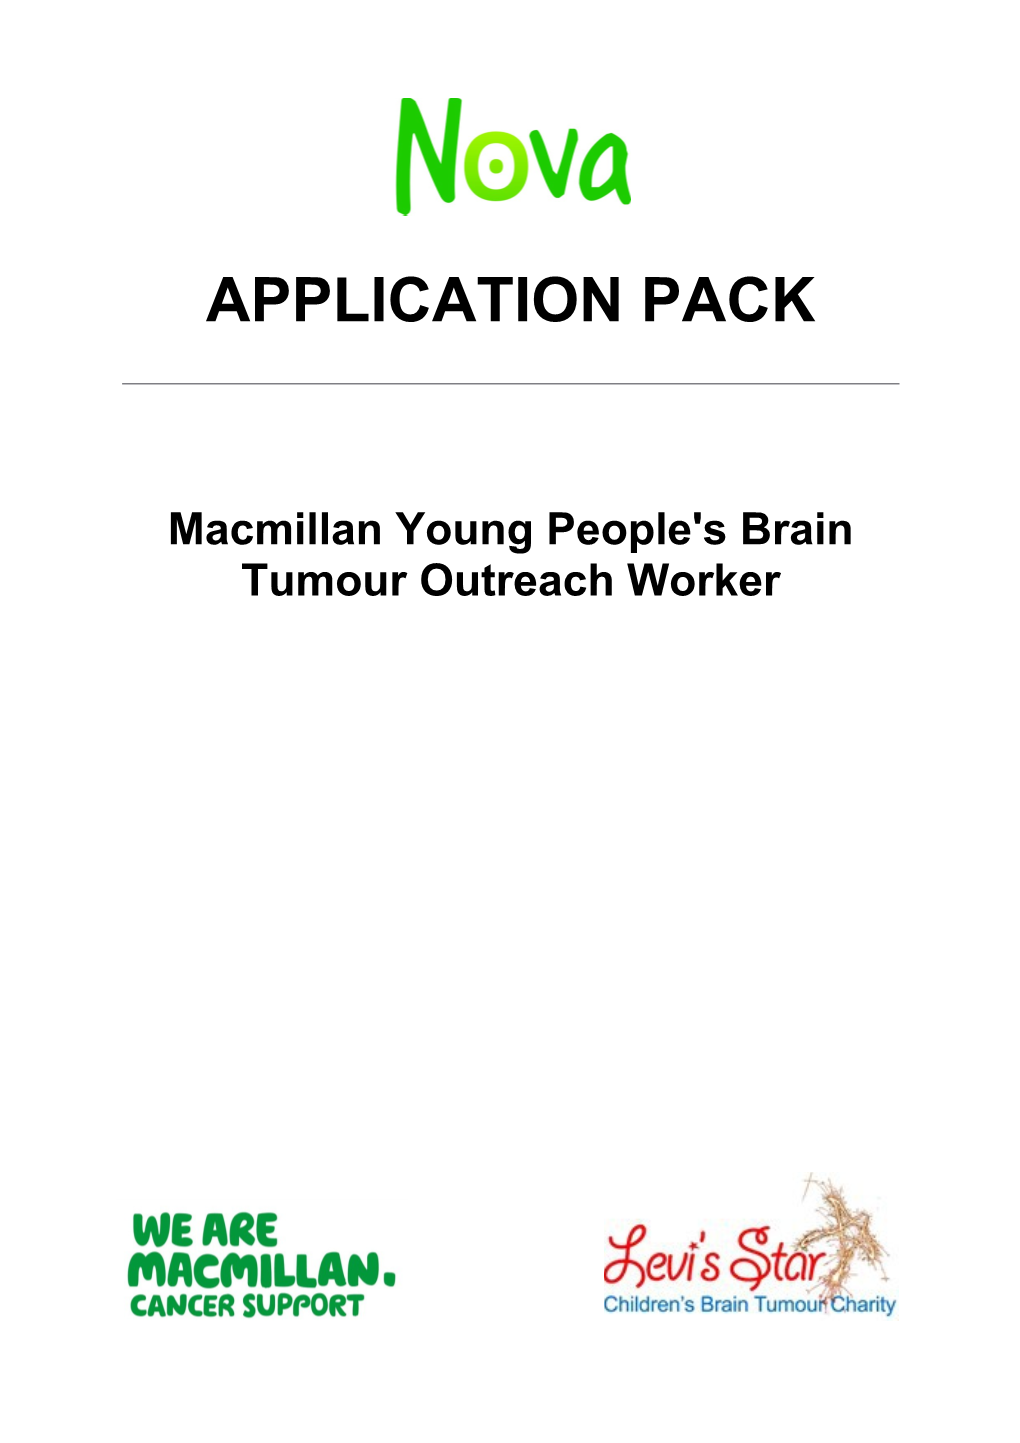 Macmillan Young People's Brain Tumour Outreach Worker